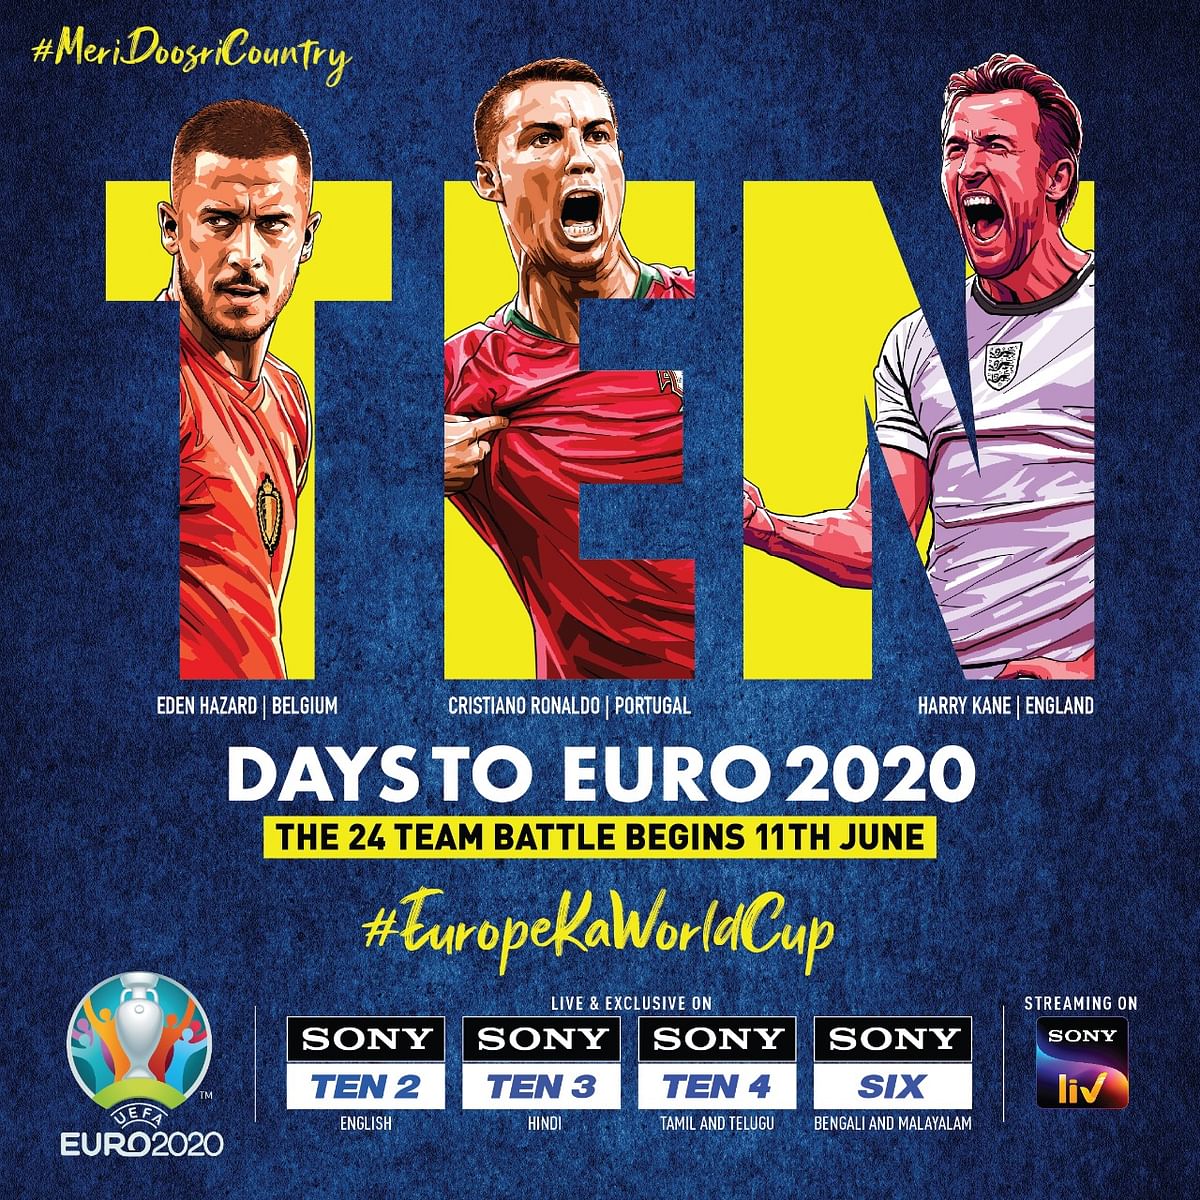 Euro 2020, Copa America: "Expecting 25% increase in distribution revenues" says Sony's Rajesh Kaul